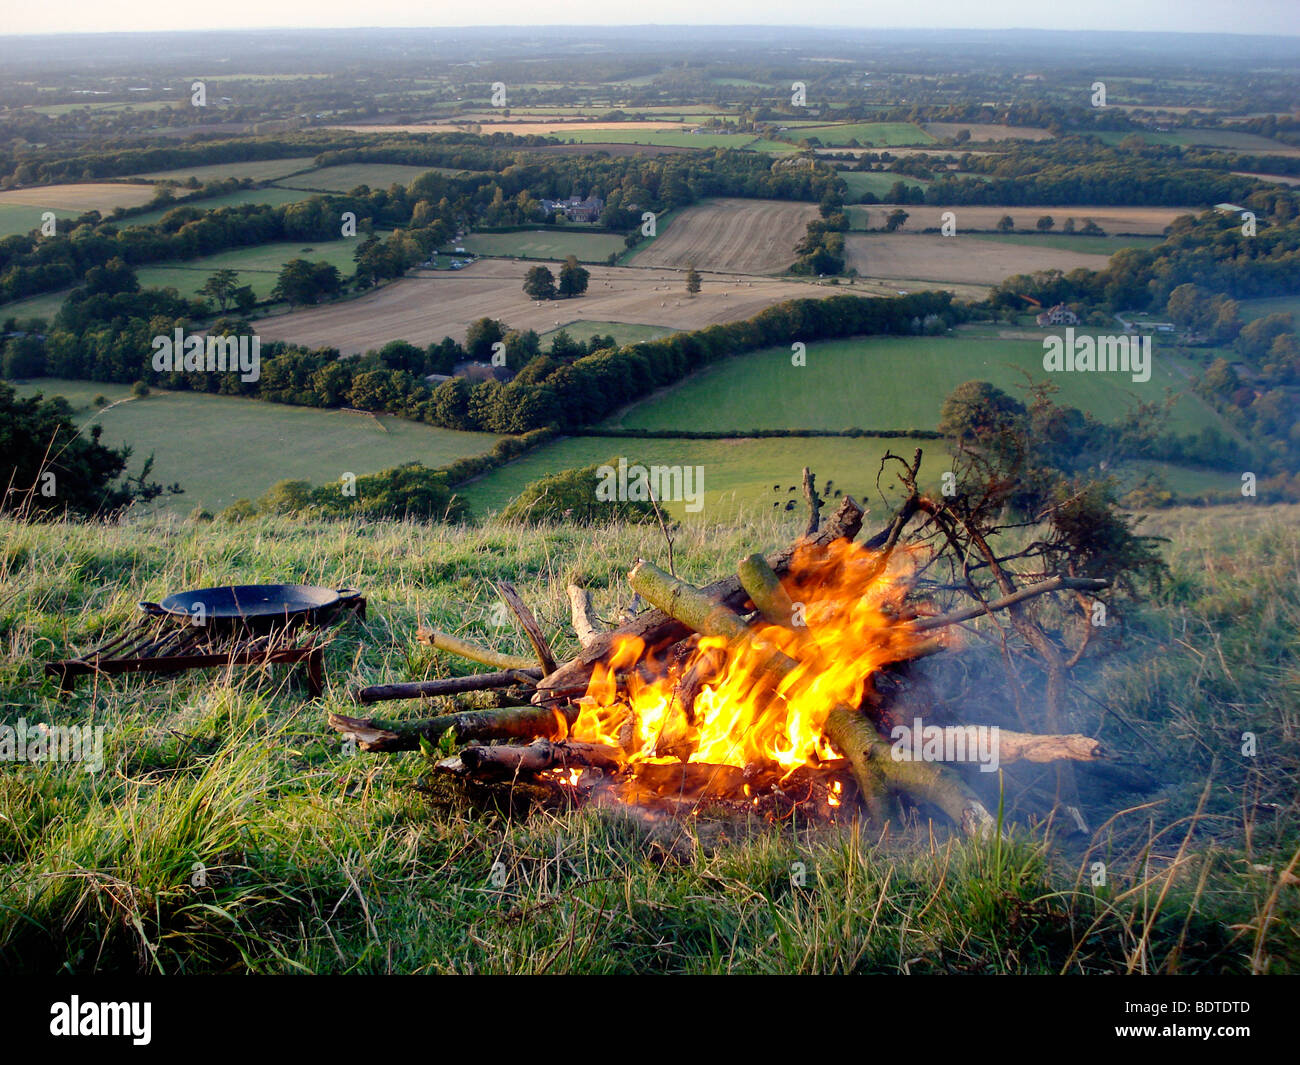 Preparing a campfire for cooking on a camping trip Stock Photo